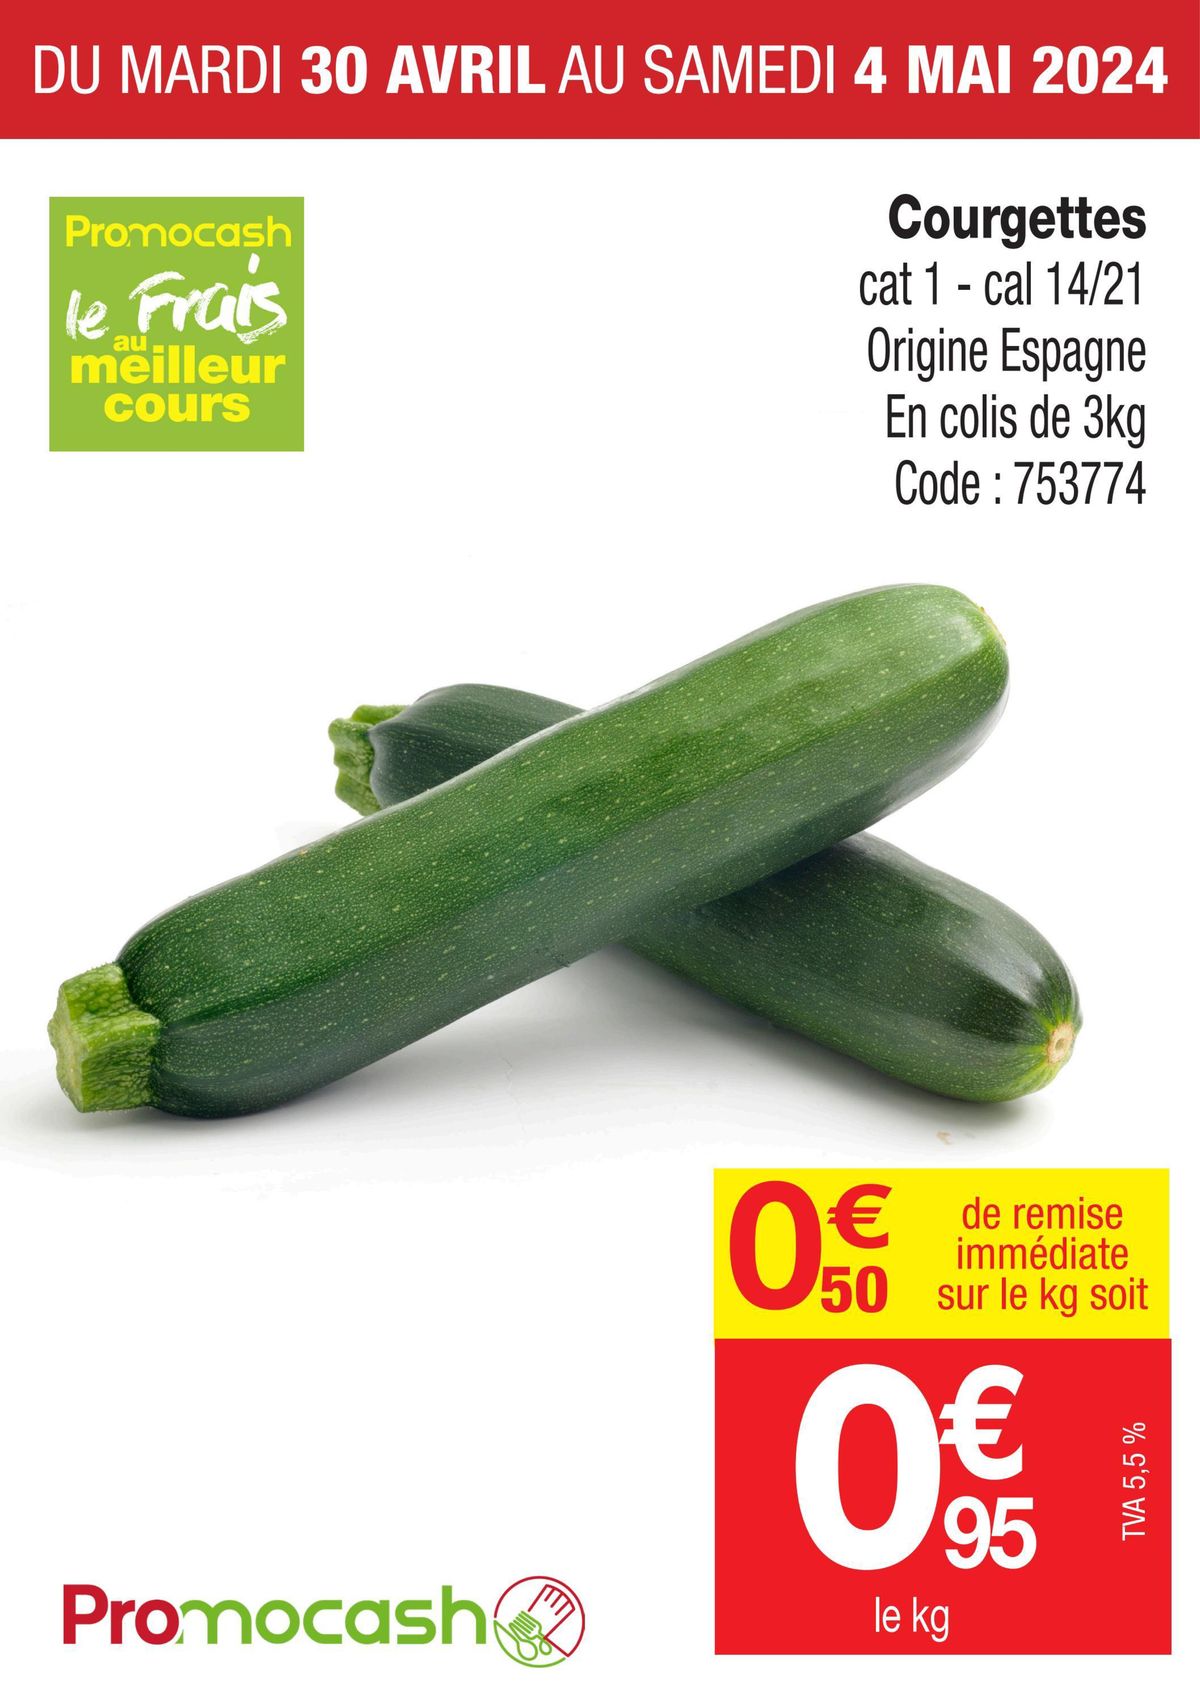 Catalogue Courgettes, page 00001